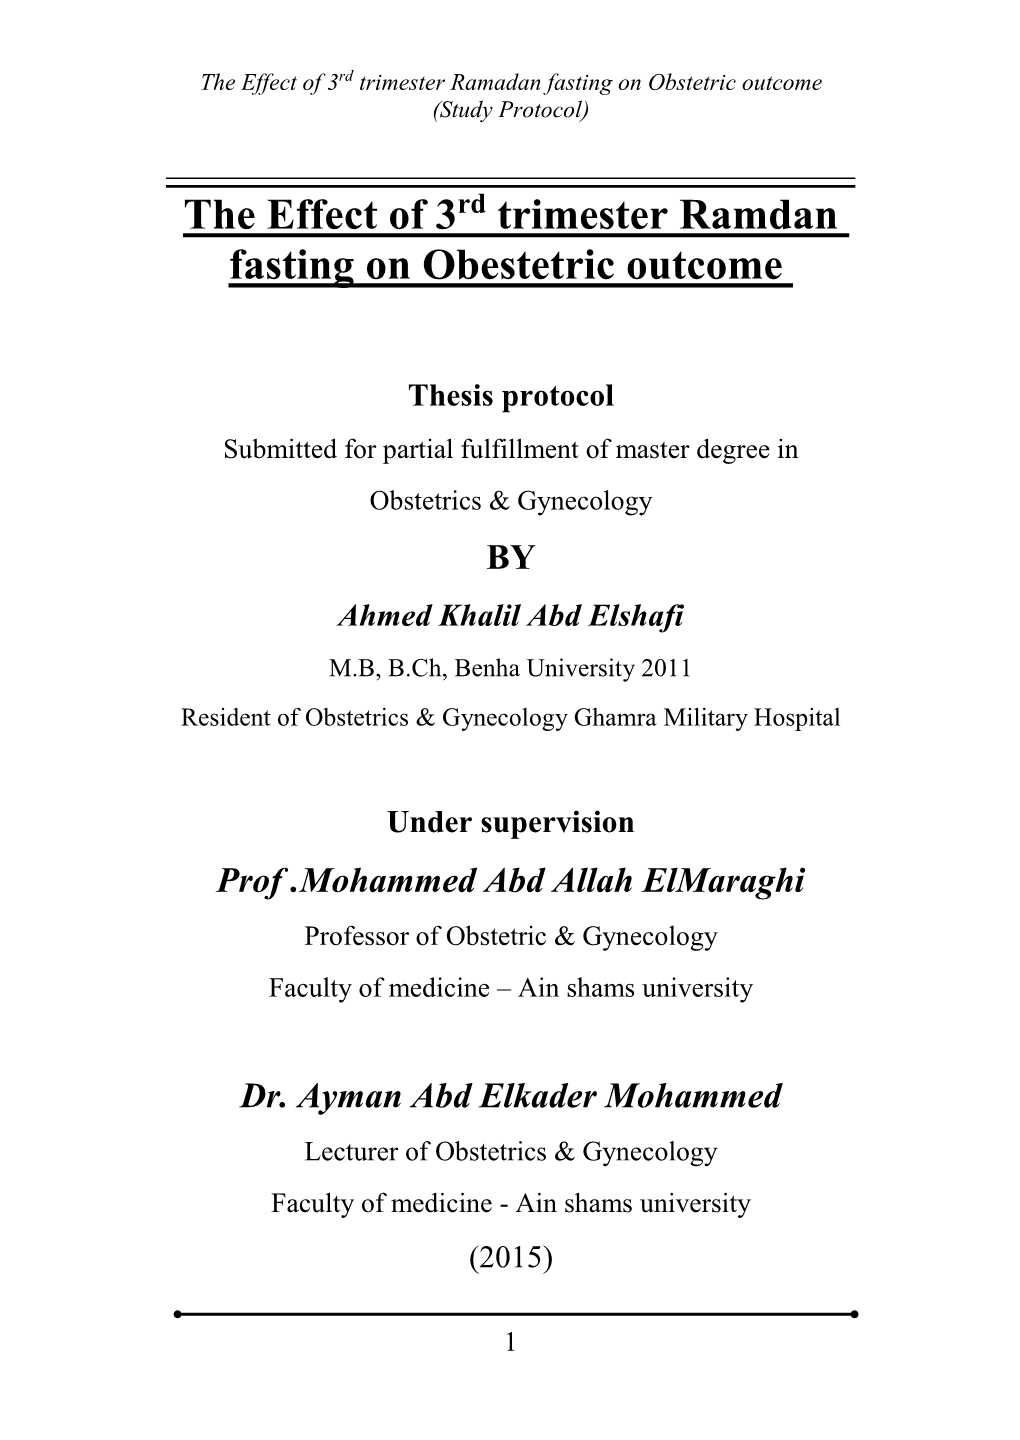 Trimester Ramdan the Effect of 3 Fasting on Obestetric Outcome